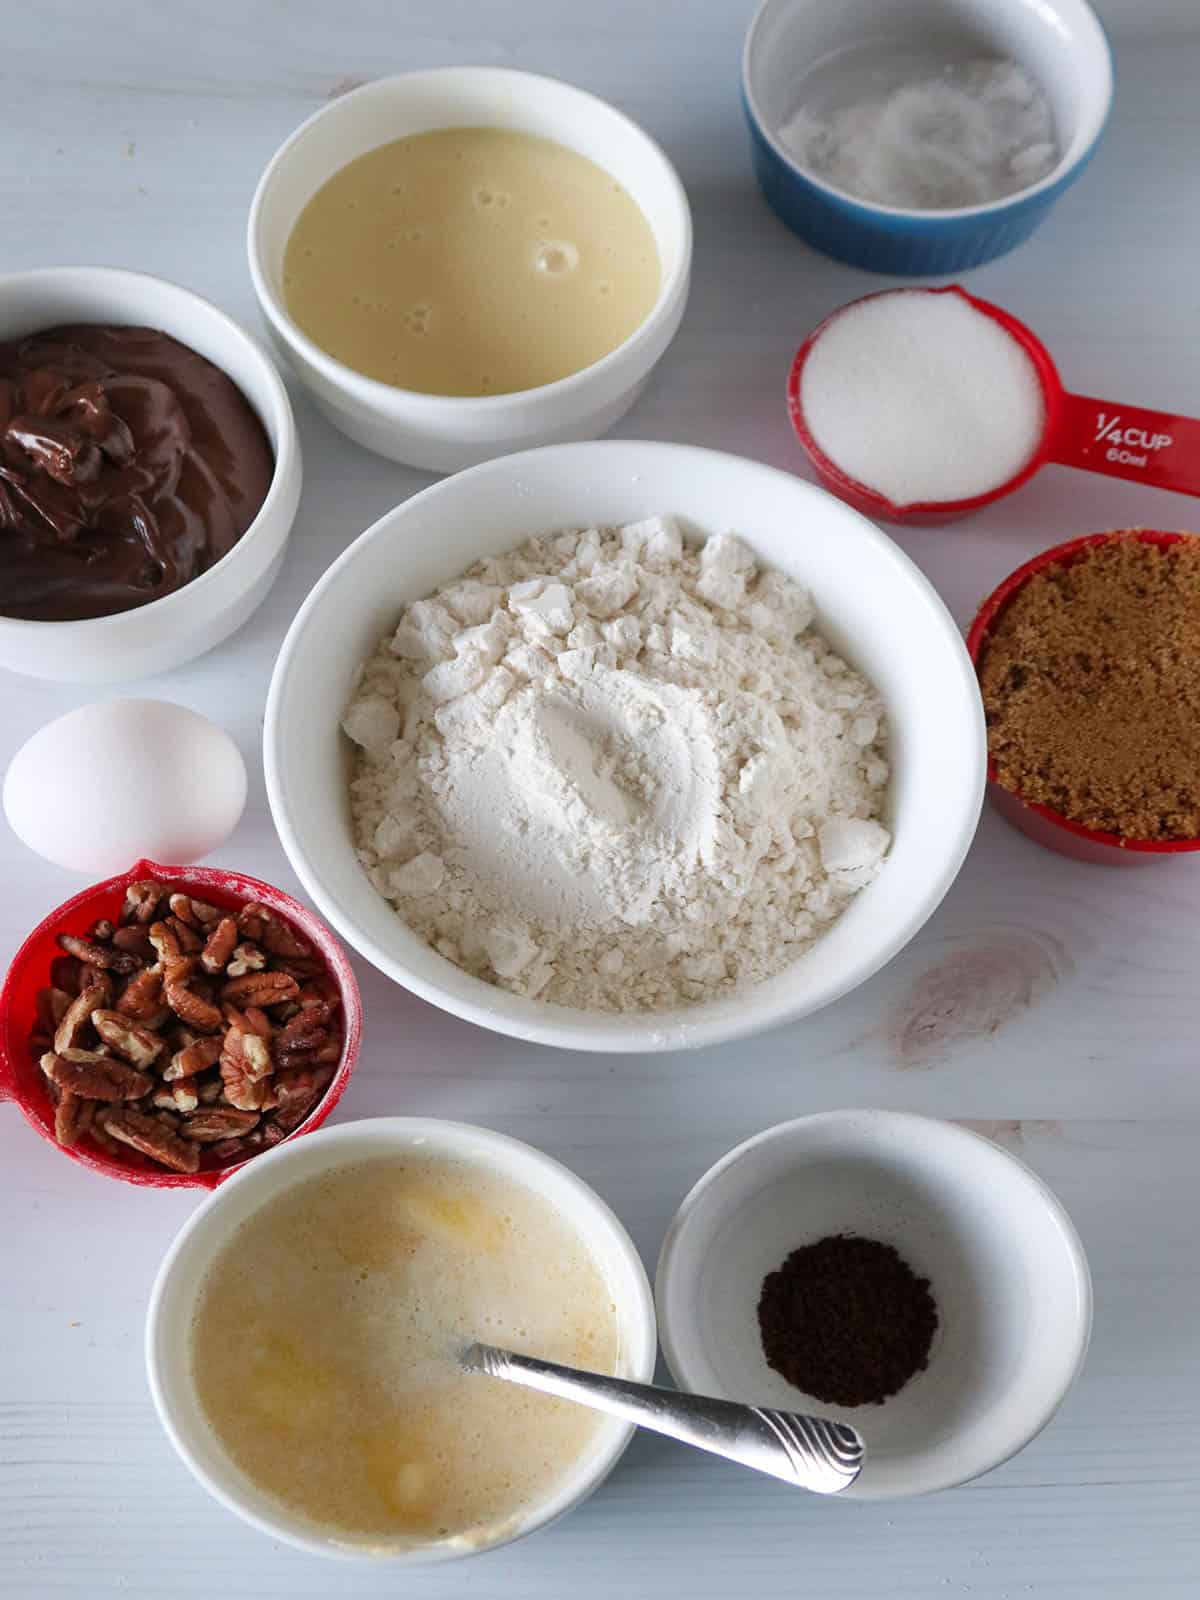 The ingredients for the Nutella Cookie bars.